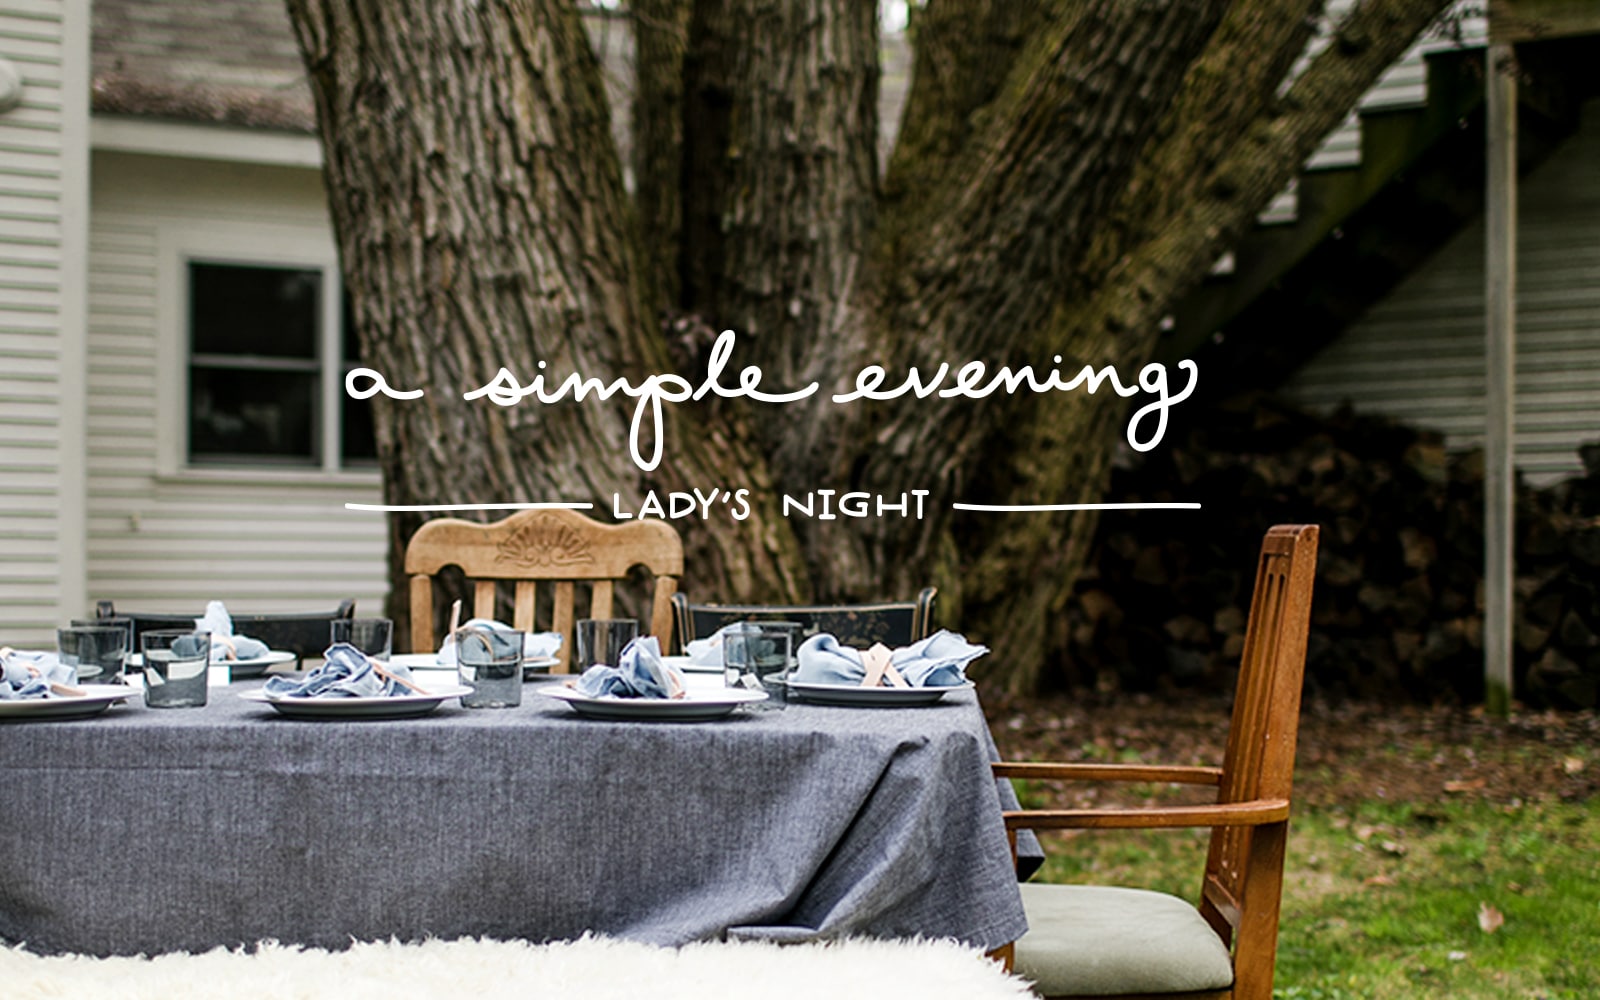 A Simple Evening: Lady’s Night